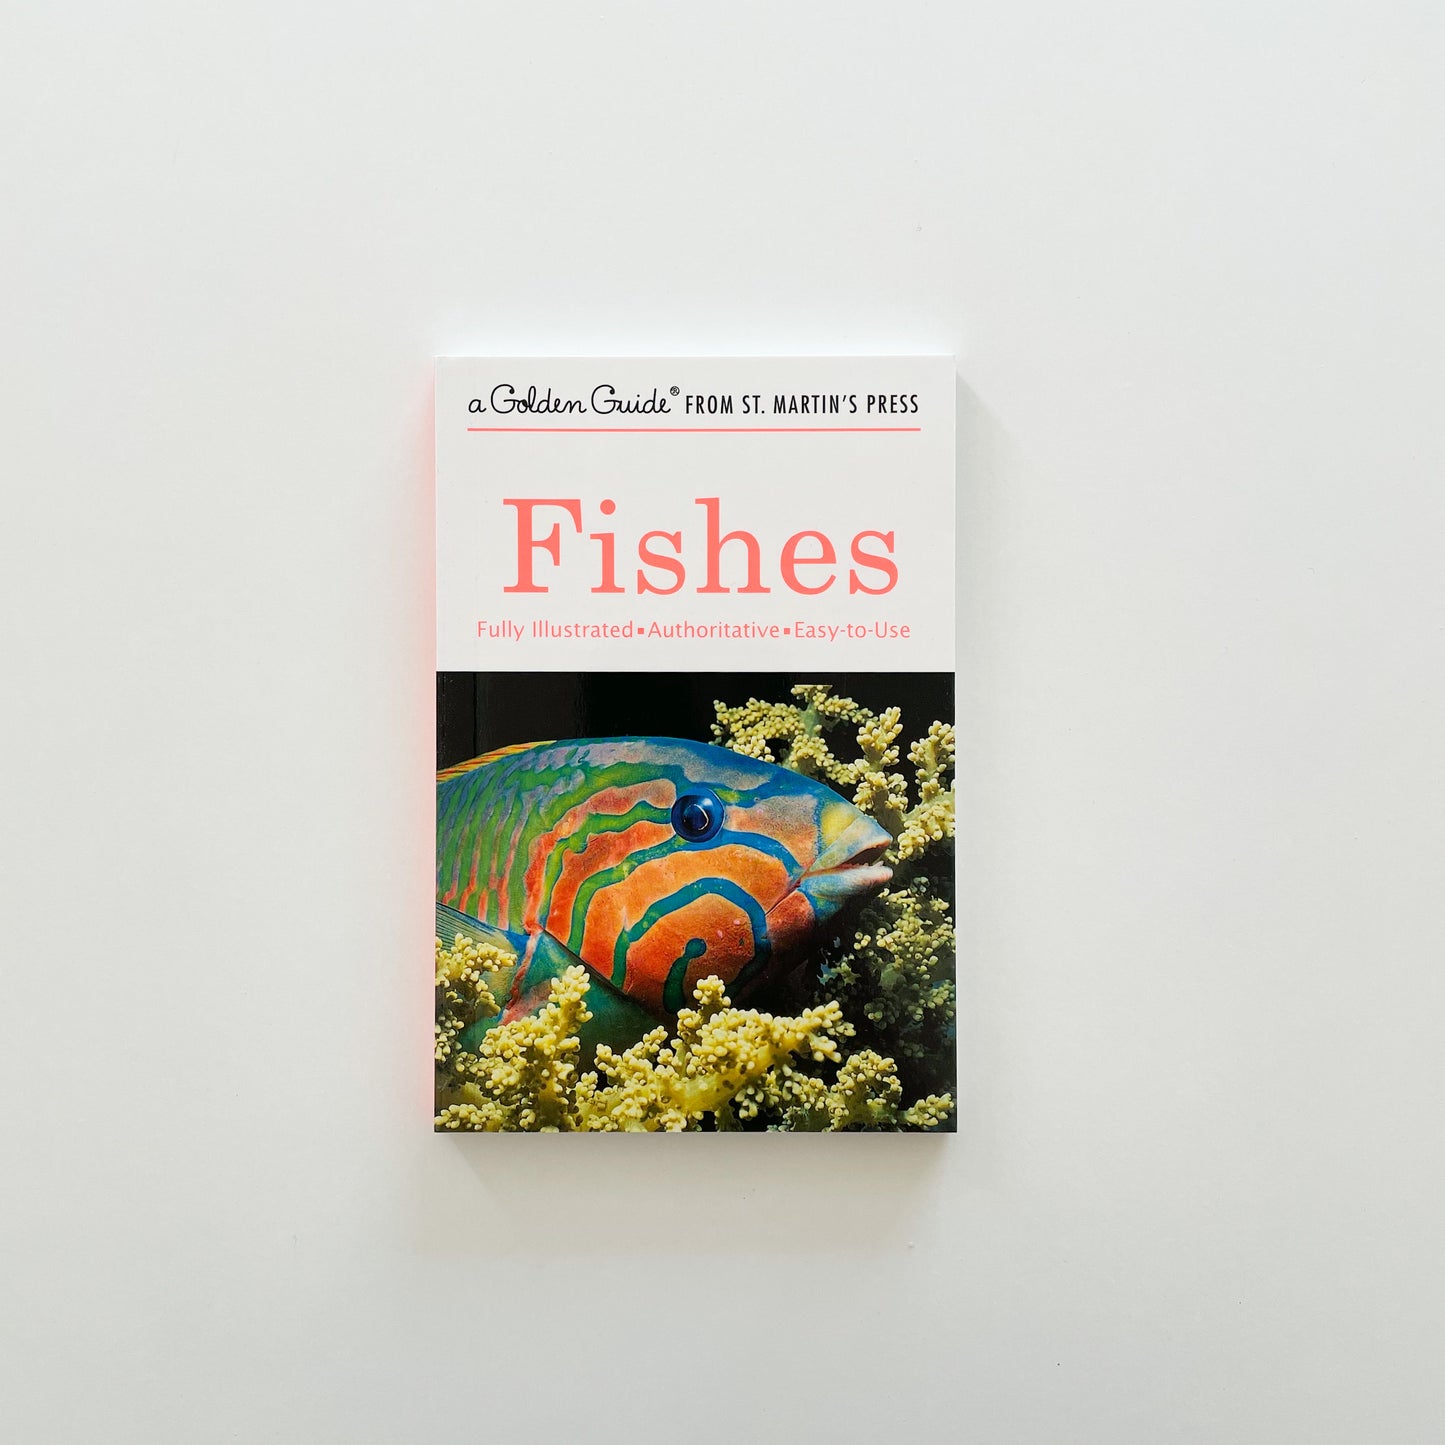 Fishes: A Fully Illustrated, Authoritative and Easy-to-Use Guide